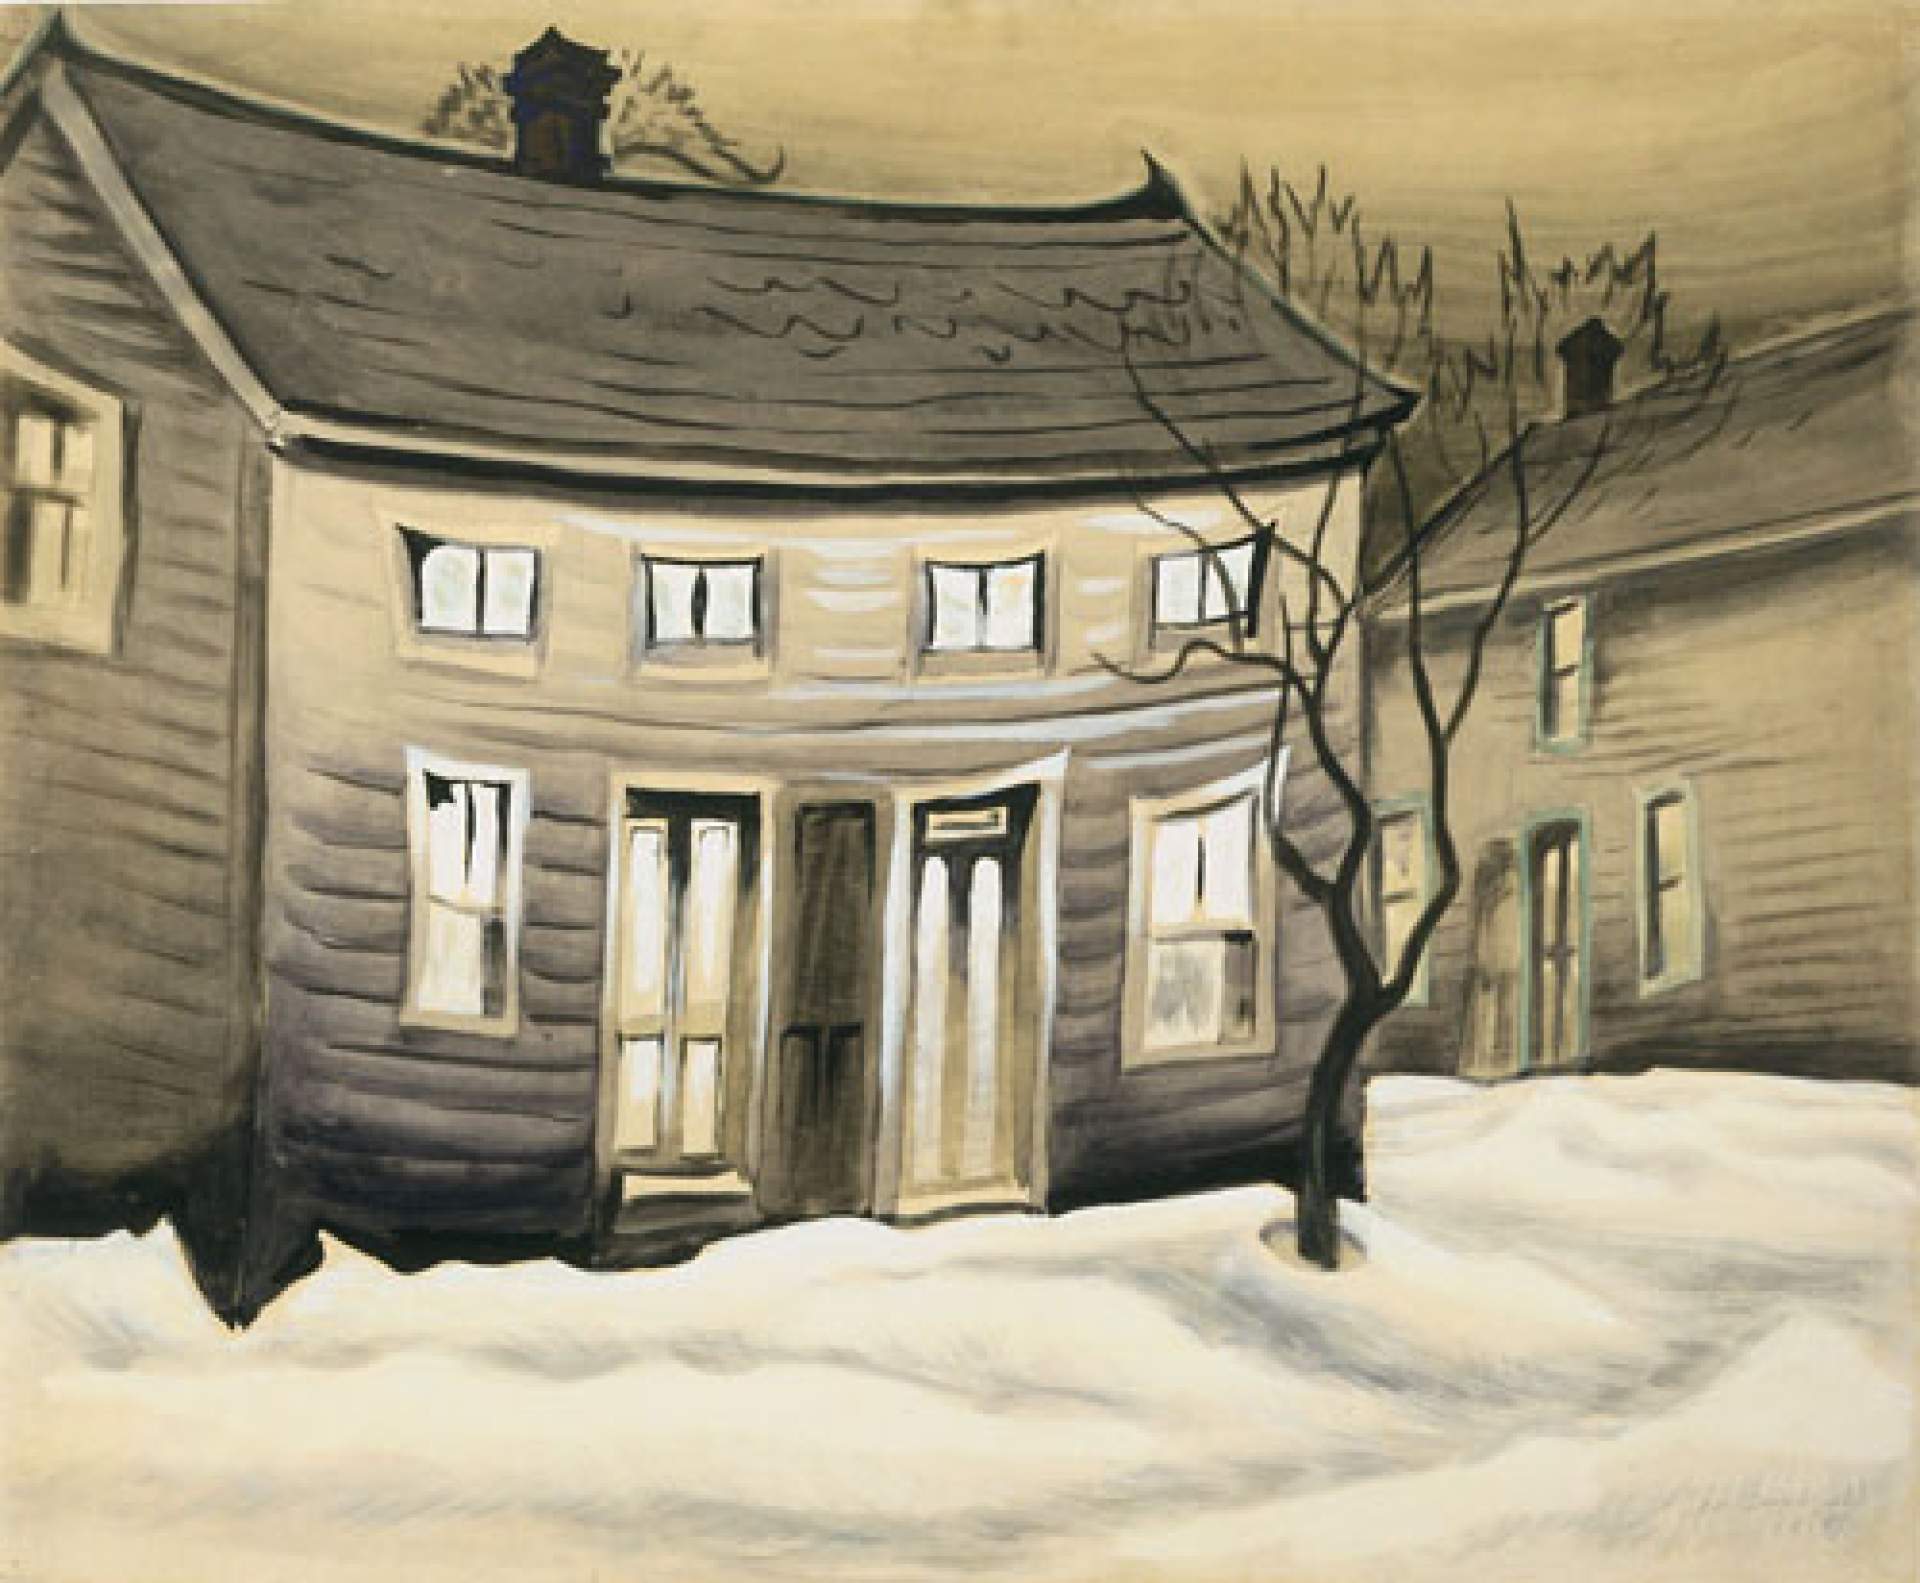 Charles E. Burchfield, "1918" in "Fifty Years as a Painter," 1965